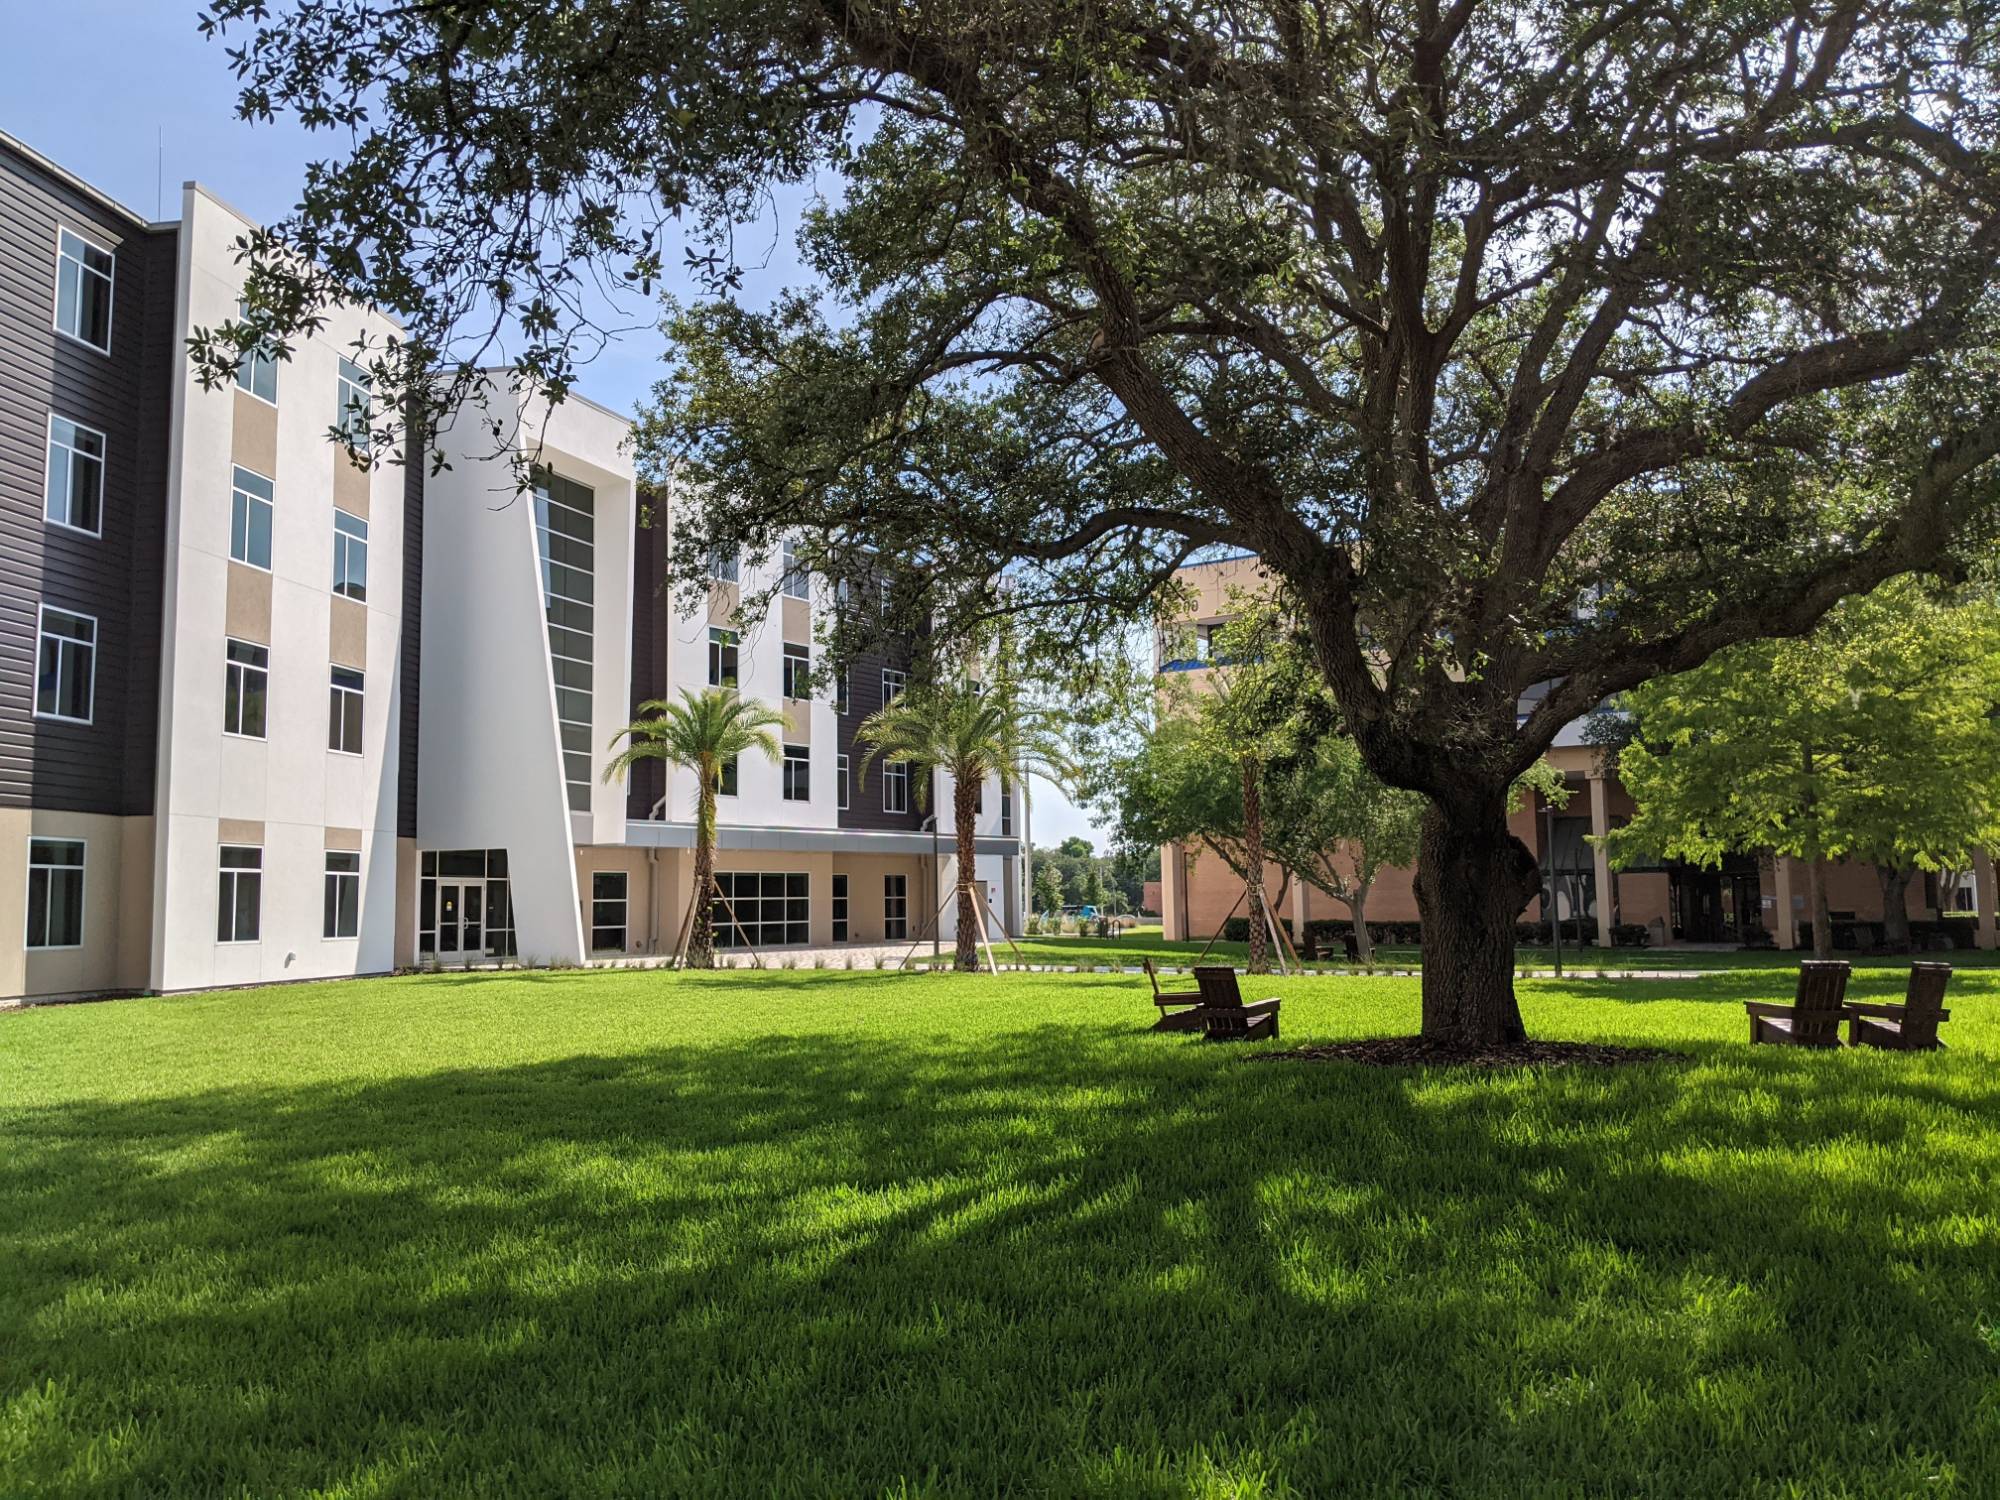 Exterior view of the DSC residence hall